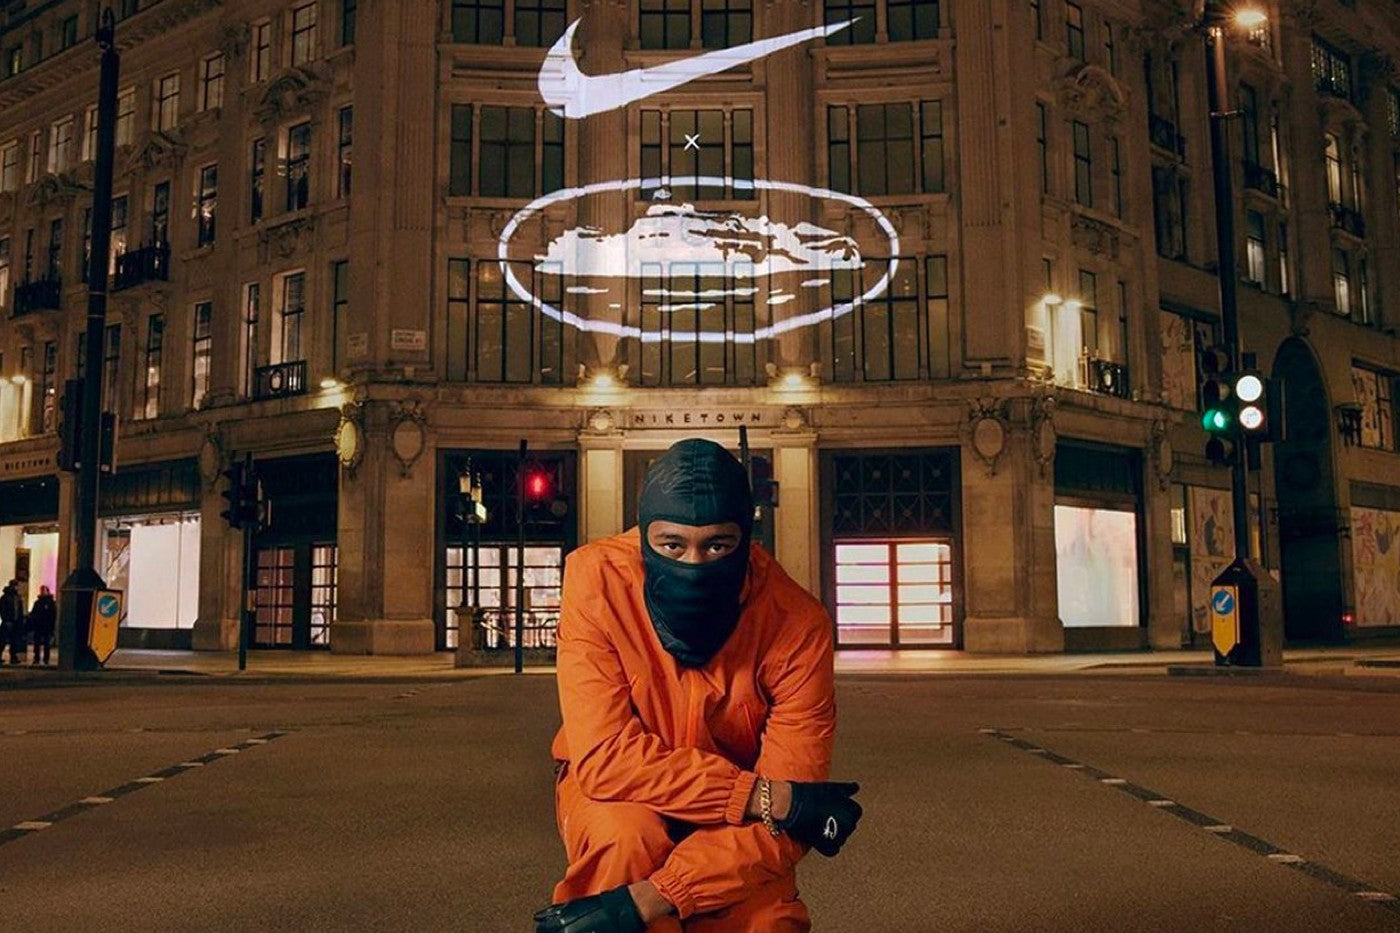 The Corteiz x Nike Collaboration Has Been Officially Confirmed